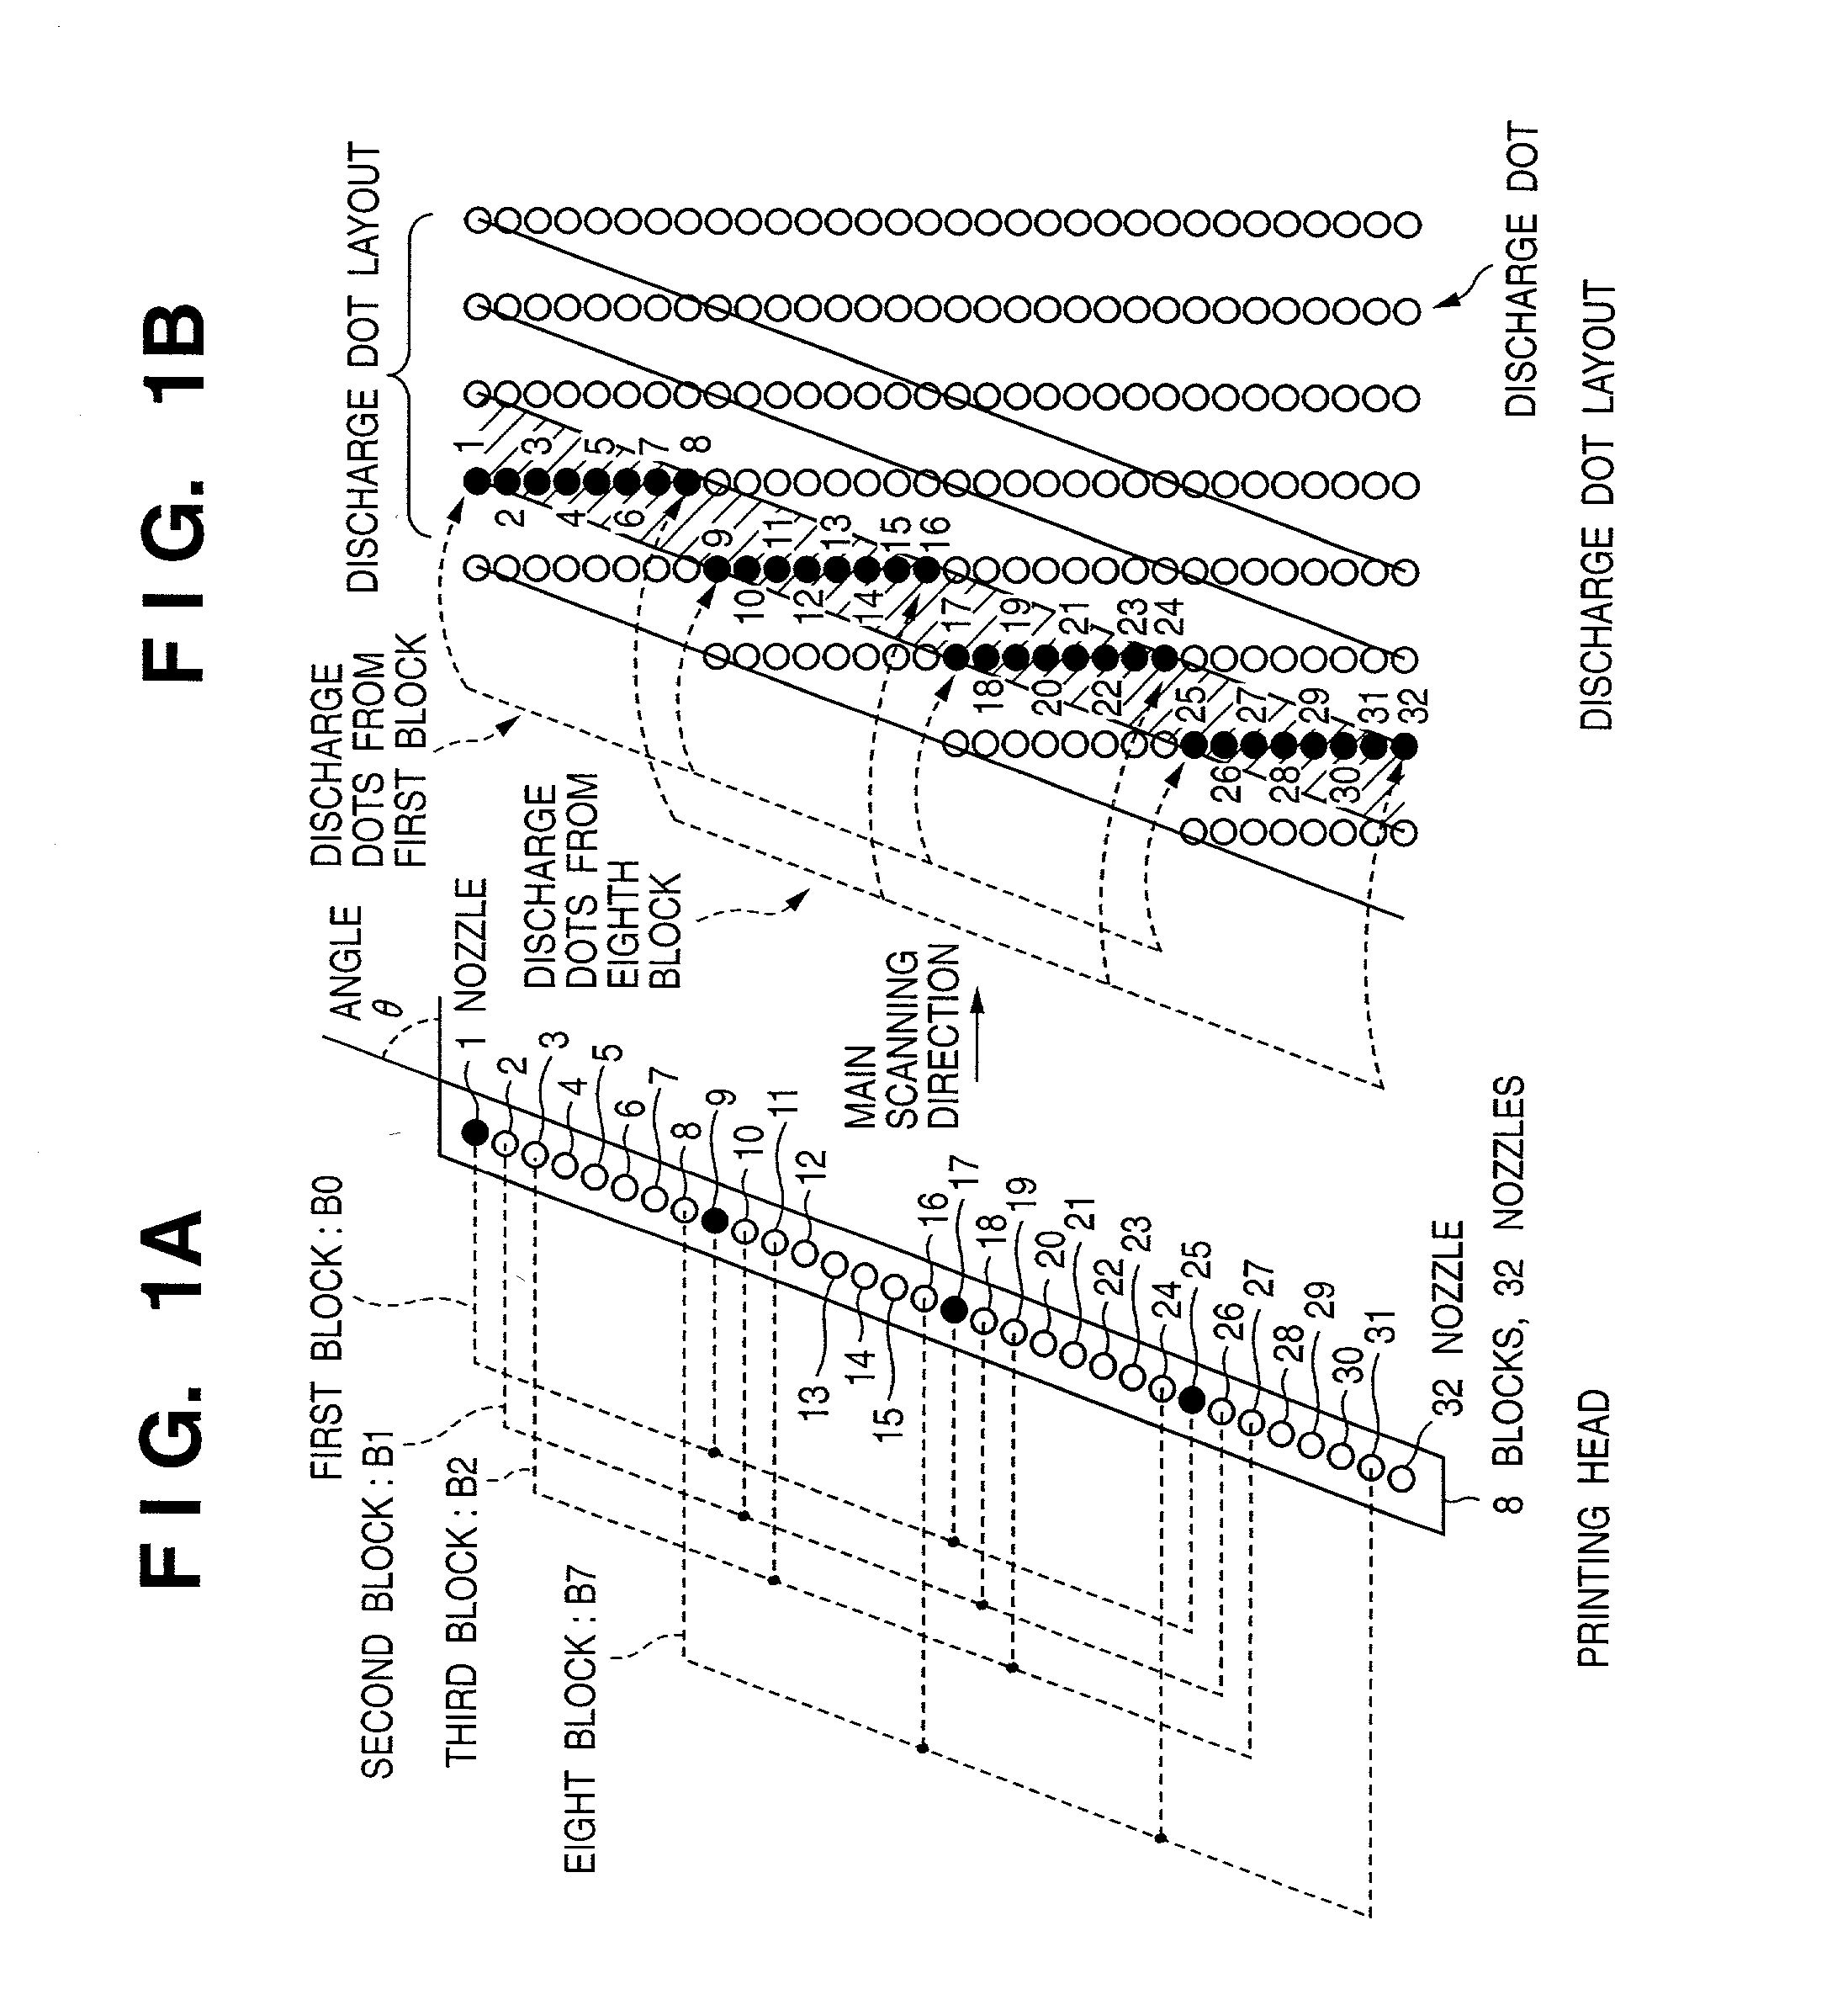 Printing head, image printing apparatus using the same, and control method therefor